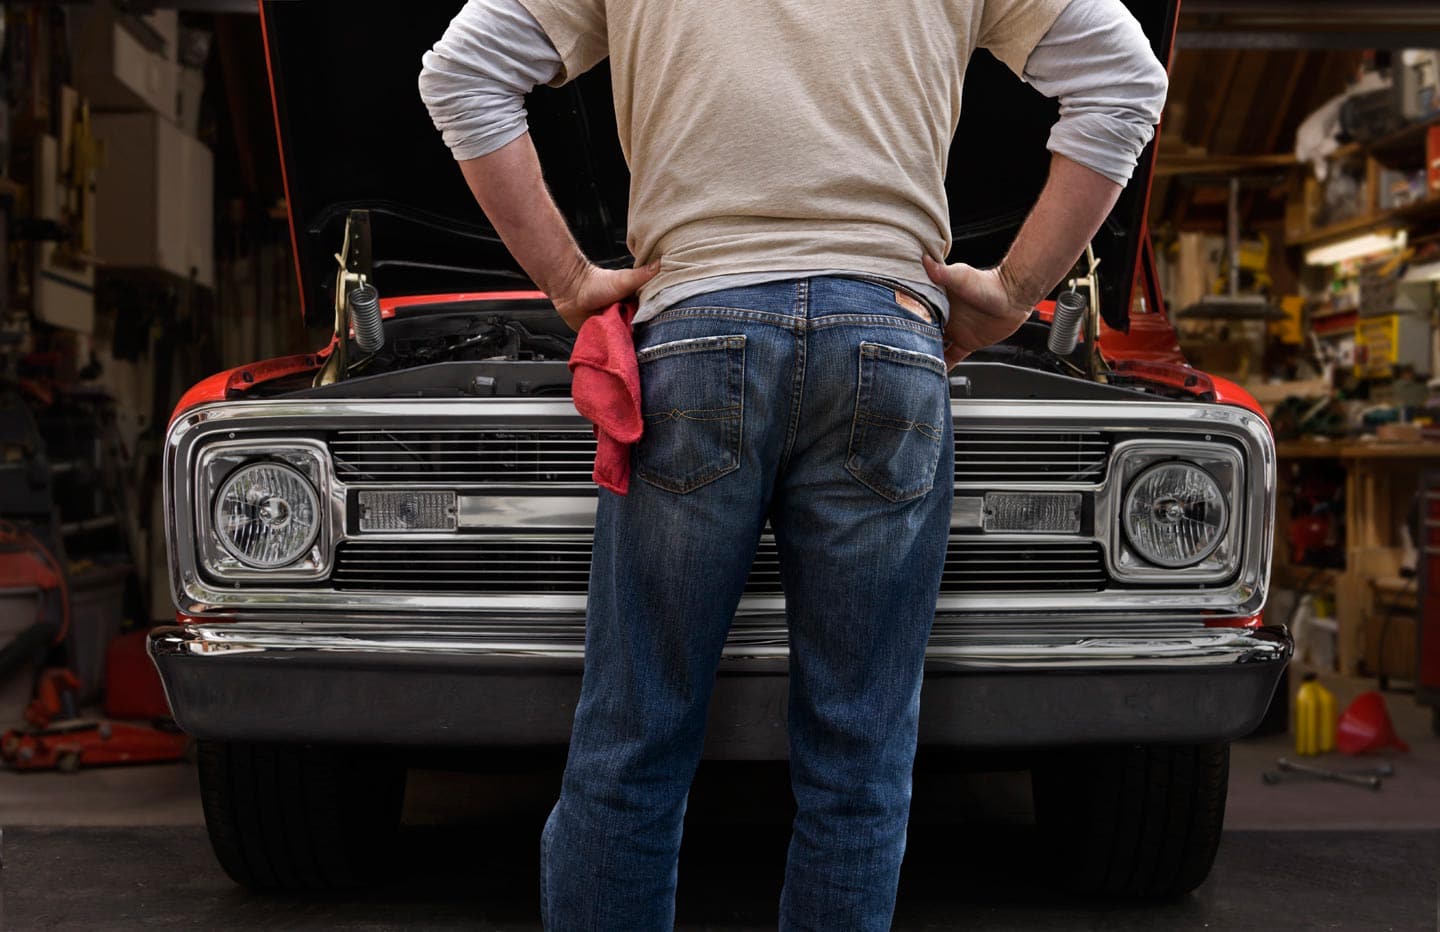 Image of Man from Behind in White Shirt and Blue Jeans with Red Hanky Standing Over Engine of Old Red Car